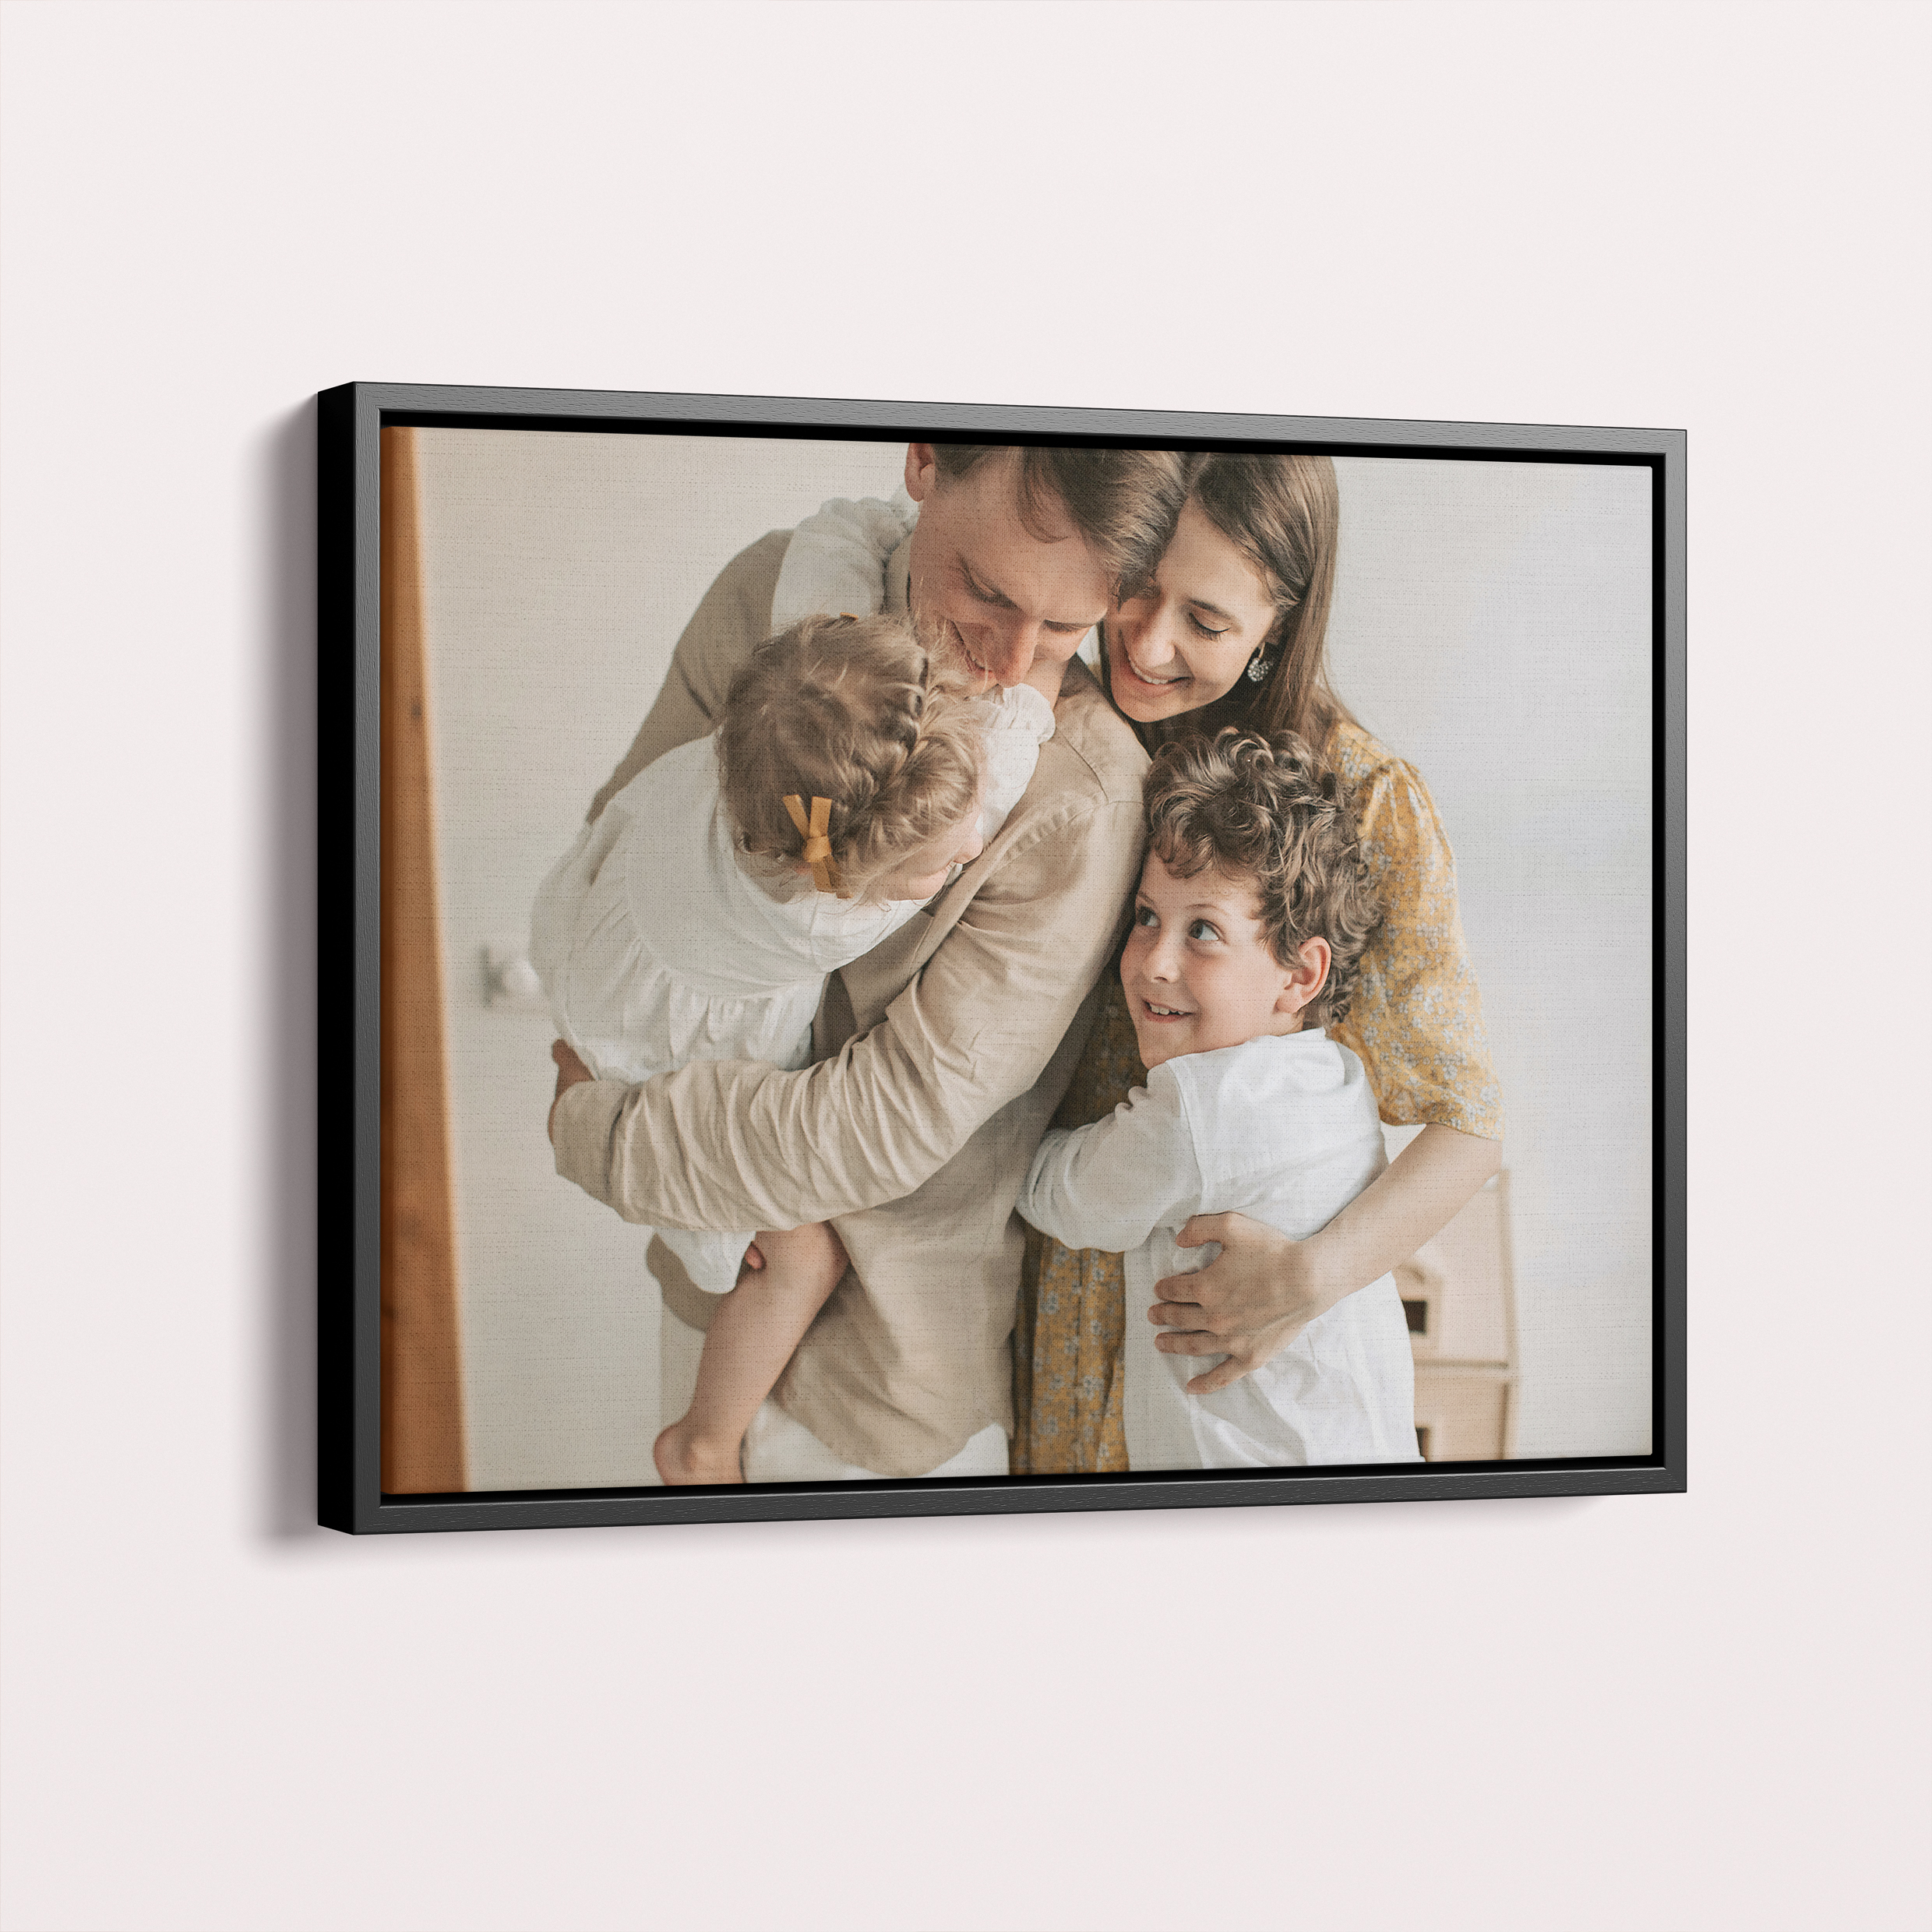  Personalized Simple Landscape Framed Photo Canvas - Craft a one-of-a-kind masterpiece with our sleek landscape-oriented design, showcasing your favorite photo uniquely.